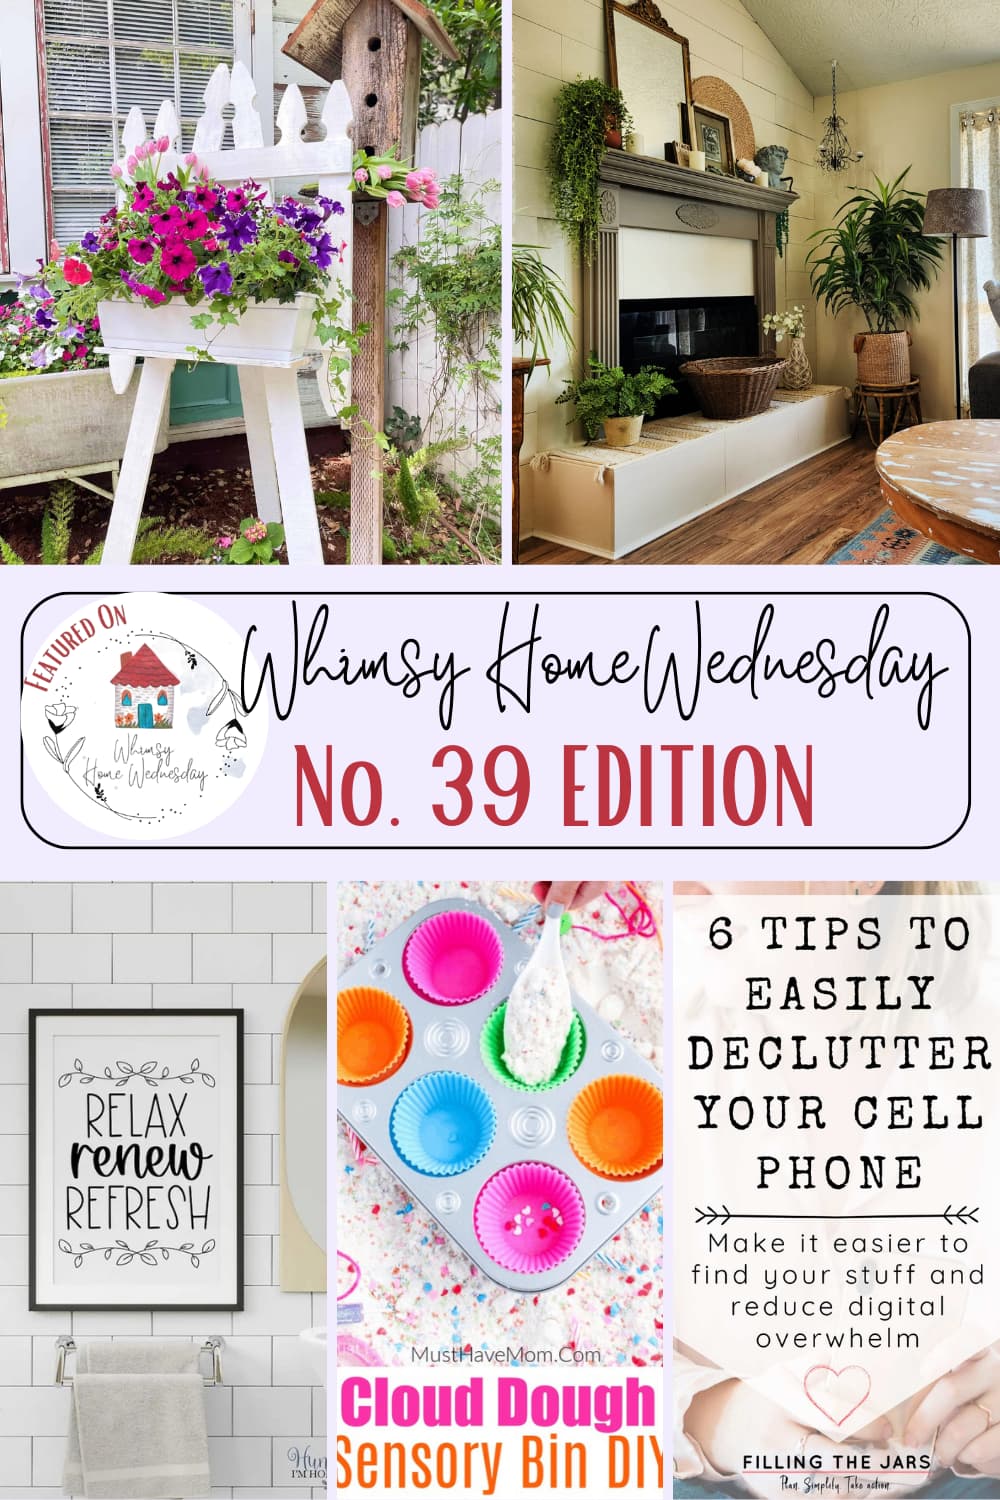 Join us on Whimsy Home Wednesday Blog Link Party No. 39 and see host projects, the features from the previous week and link up your posts!